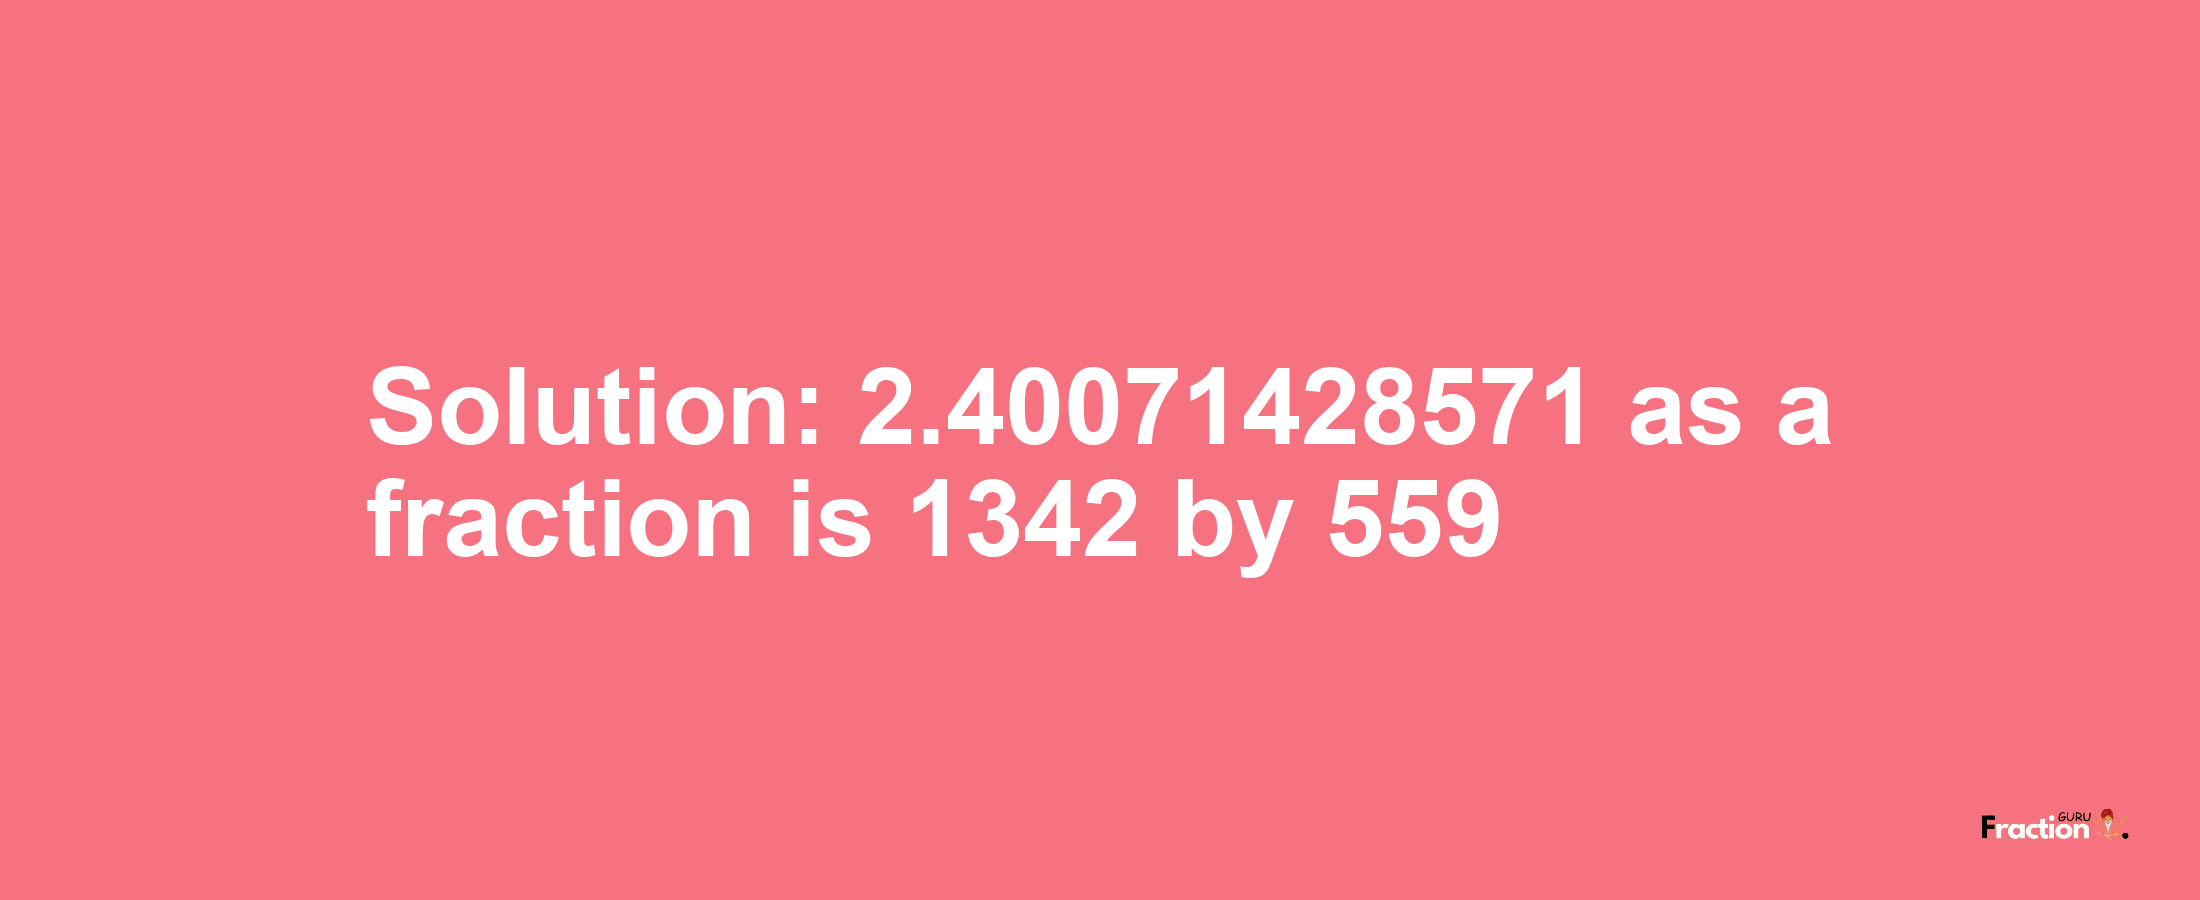 Solution:2.40071428571 as a fraction is 1342/559